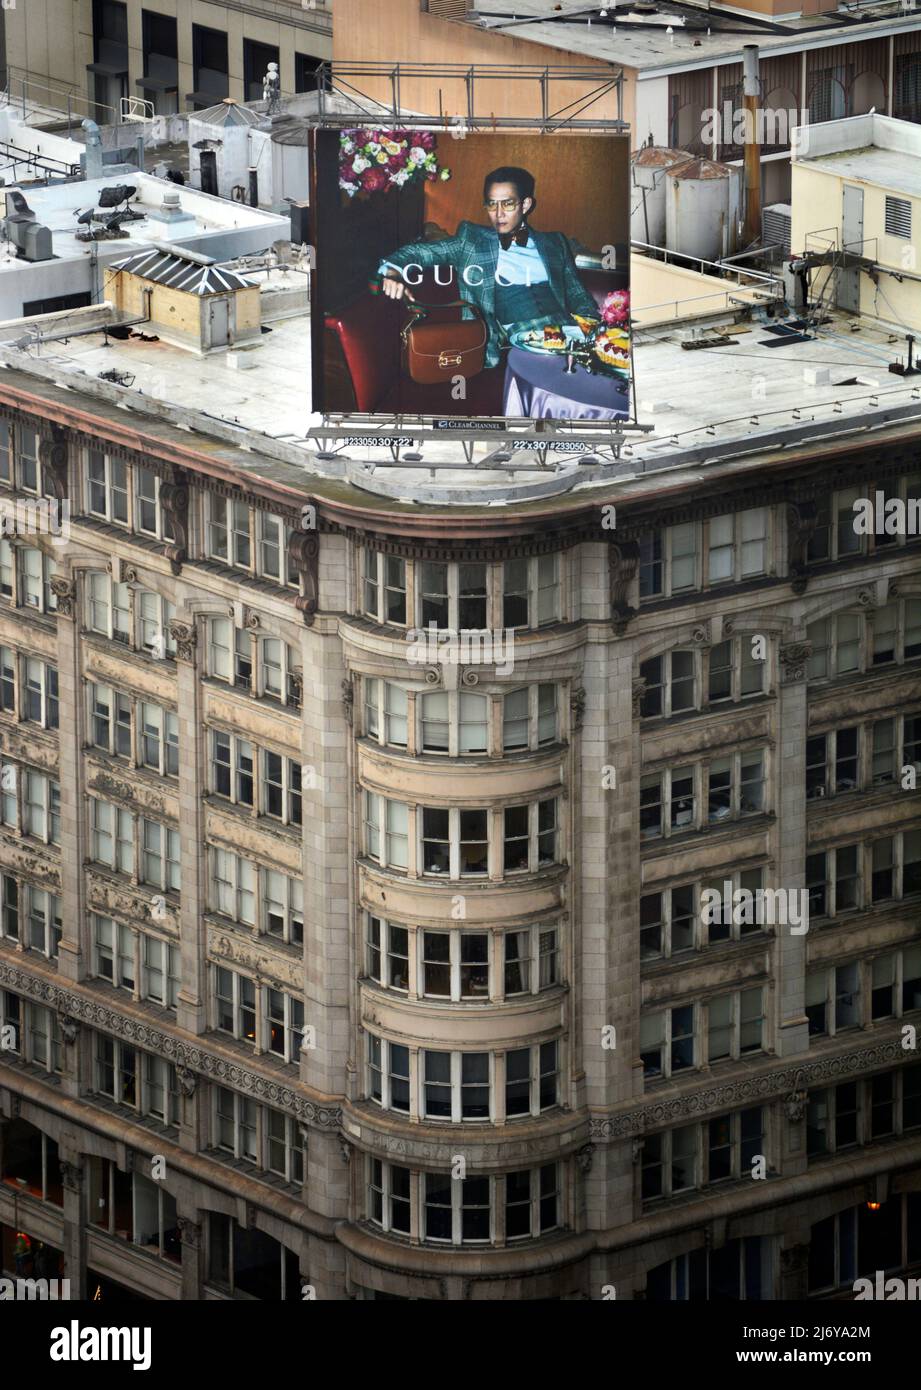 A billboard advertises the Gucci fashion brand atop a building in Union  Square, San Francisco, California. Gucci is an Italian high-end luxury  brand Stock Photo - Alamy